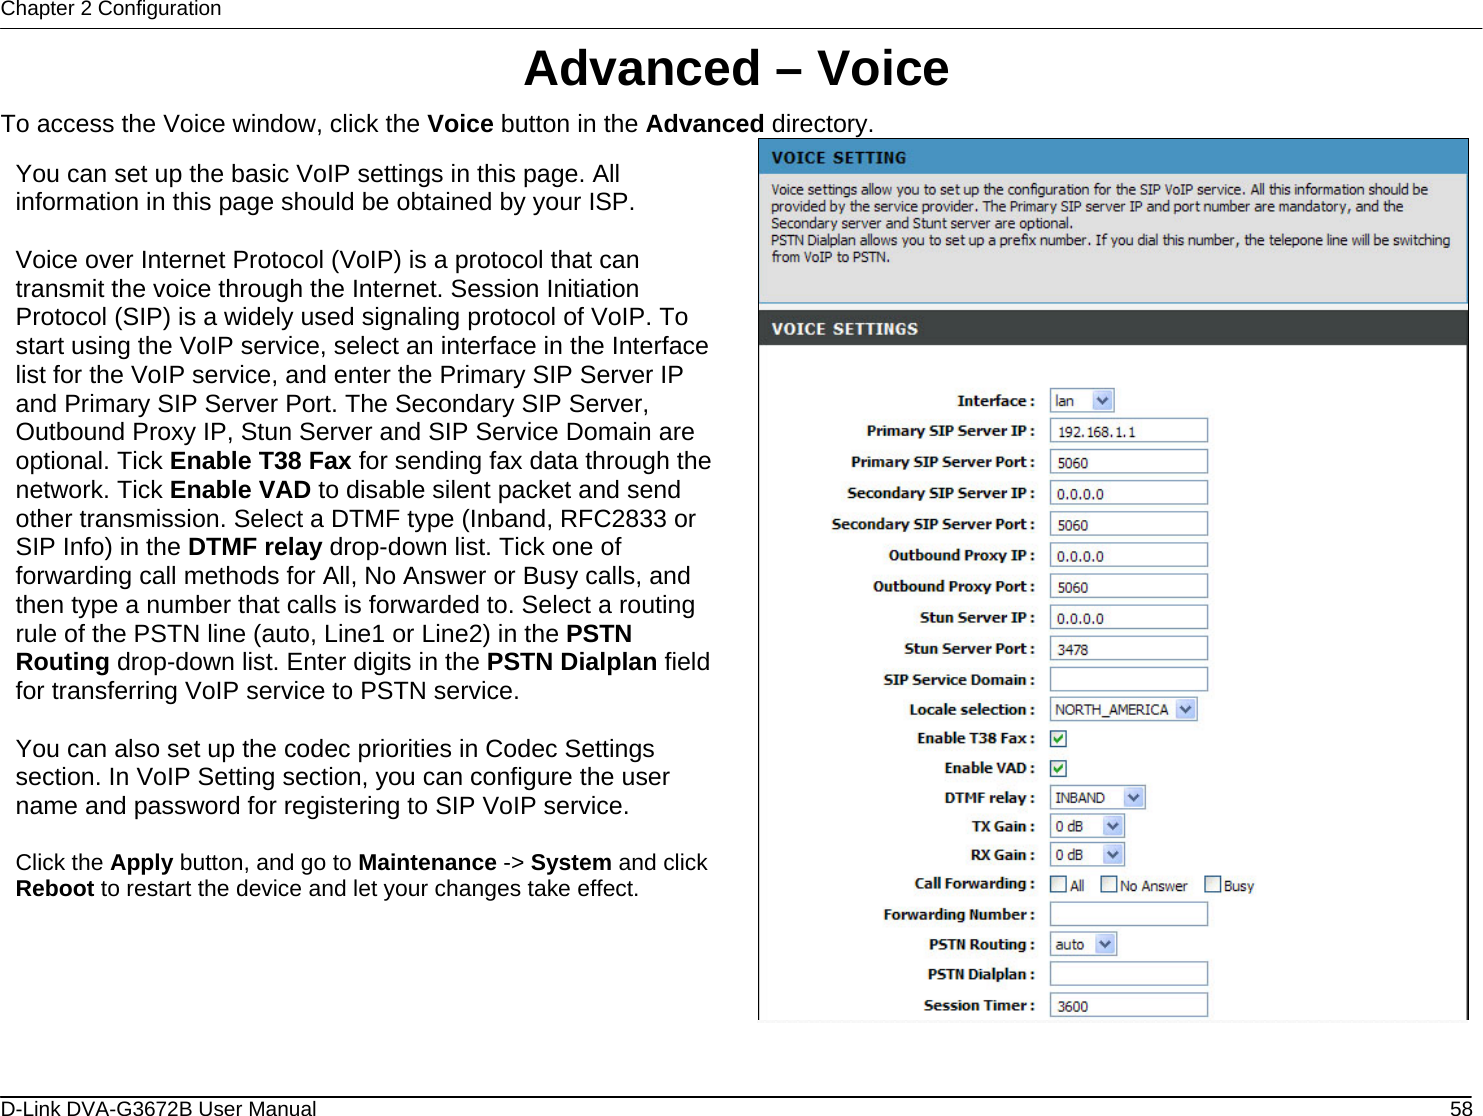 Chapter 2 Configuration Advanced – Voice To access the Voice window, click the Voice button in the Advanced directory.  You can set up the basic VoIP settings in this page. All information in this page should be obtained by your ISP.  Voice over Internet Protocol (VoIP) is a protocol that can transmit the voice through the Internet. Session Initiation Protocol (SIP) is a widely used signaling protocol of VoIP. To start using the VoIP service, select an interface in the Interface list for the VoIP service, and enter the Primary SIP Server IP and Primary SIP Server Port. The Secondary SIP Server, Outbound Proxy IP, Stun Server and SIP Service Domain are optional. Tick Enable T38 Fax for sending fax data through the network. Tick Enable VAD to disable silent packet and send other transmission. Select a DTMF type (Inband, RFC2833 or SIP Info) in the DTMF relay drop-down list. Tick one of forwarding call methods for All, No Answer or Busy calls, and then type a number that calls is forwarded to. Select a routing rule of the PSTN line (auto, Line1 or Line2) in the PSTN Routing drop-down list. Enter digits in the PSTN Dialplan field for transferring VoIP service to PSTN service.  You can also set up the codec priorities in Codec Settings section. In VoIP Setting section, you can configure the user name and password for registering to SIP VoIP service.  Click the Apply button, and go to Maintenance -&gt; System and click Reboot to restart the device and let your changes take effect.   D-Link DVA-G3672B User Manual  58